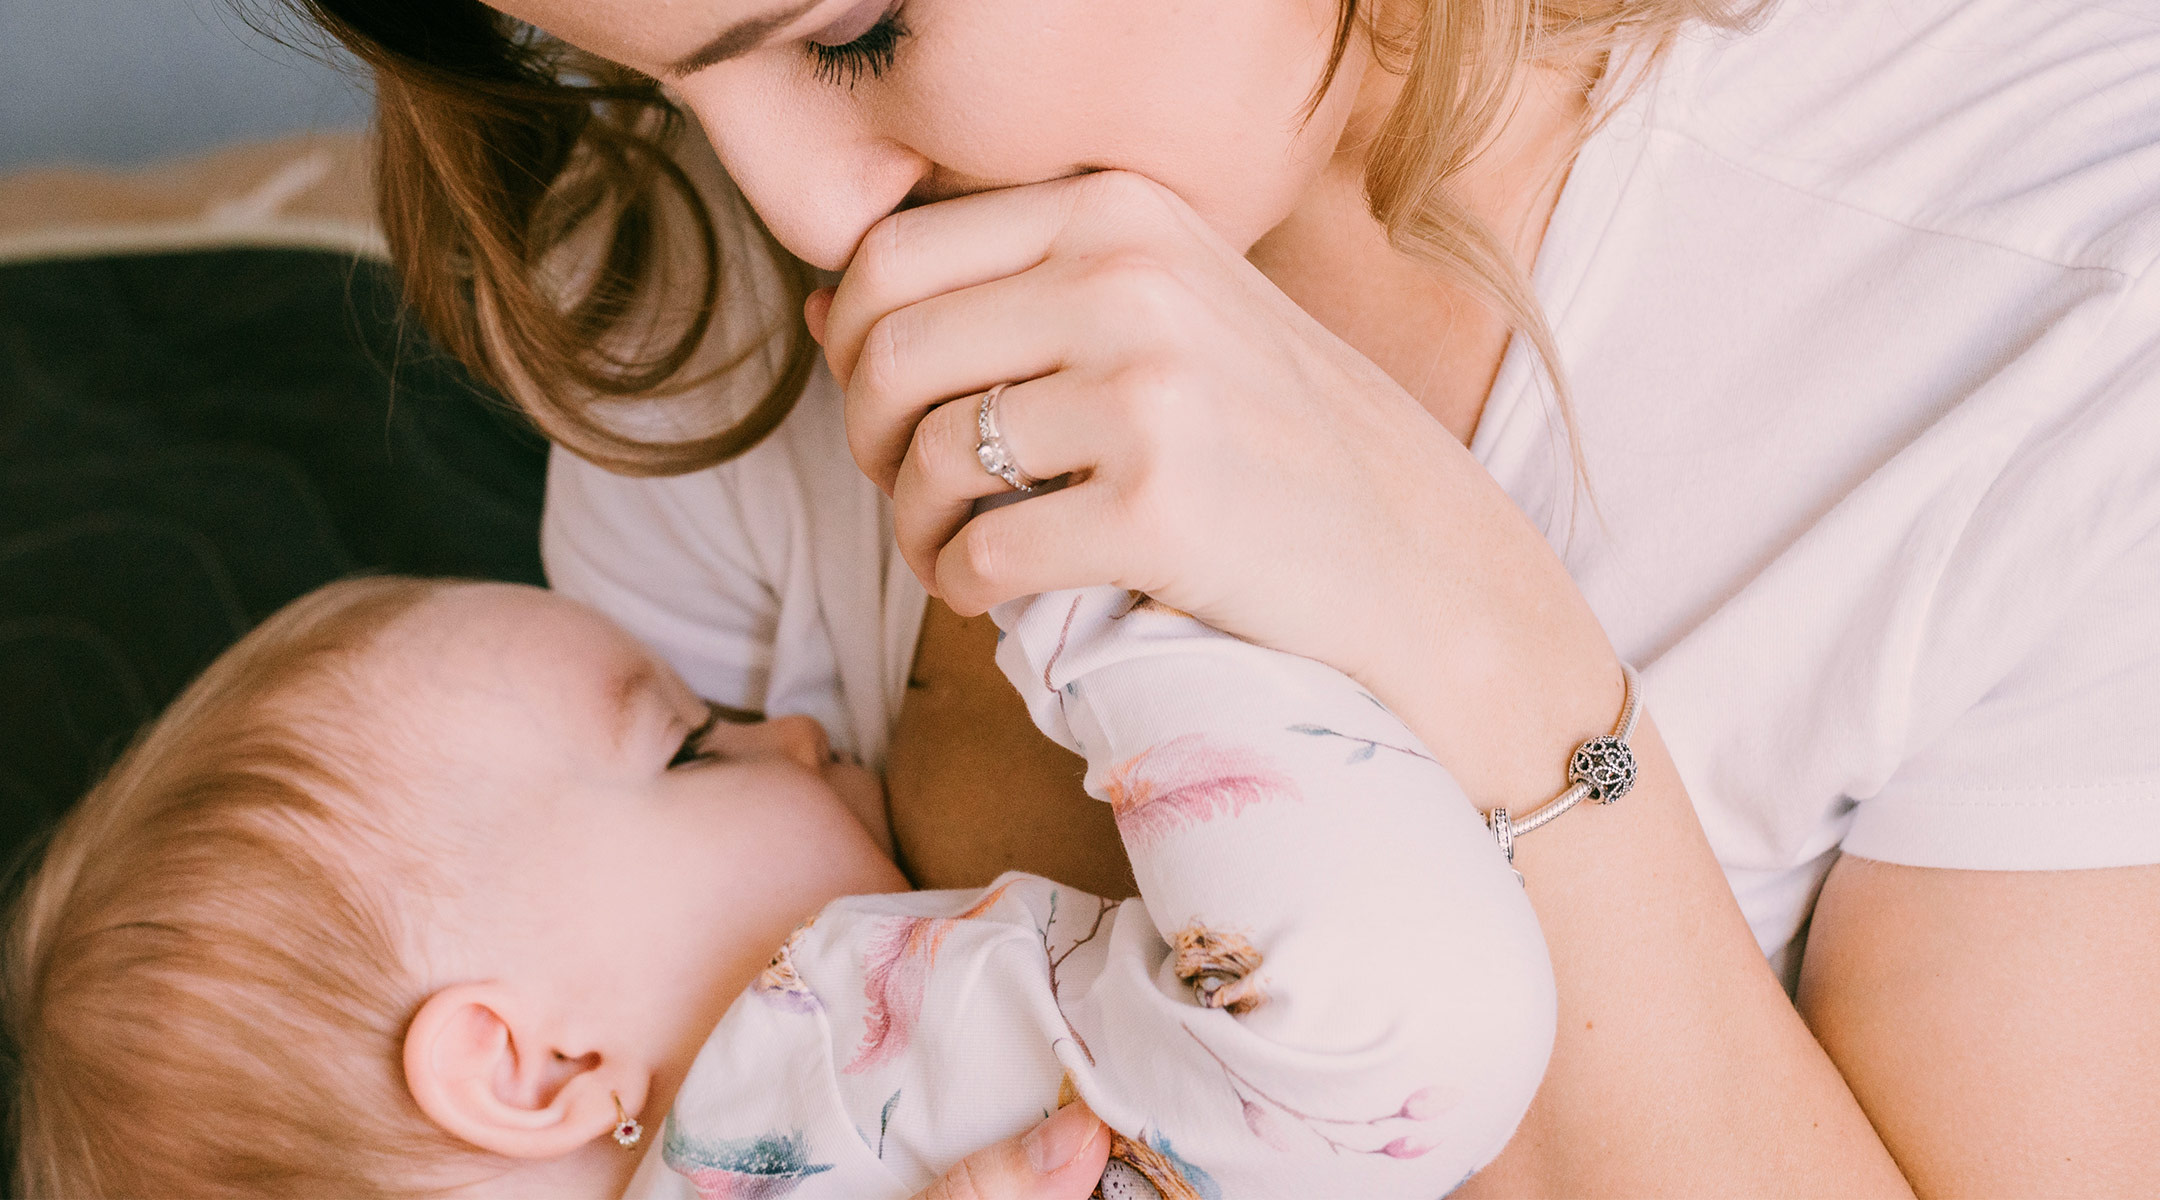 tender moment of mom breastfeeding baby while kissing her hand